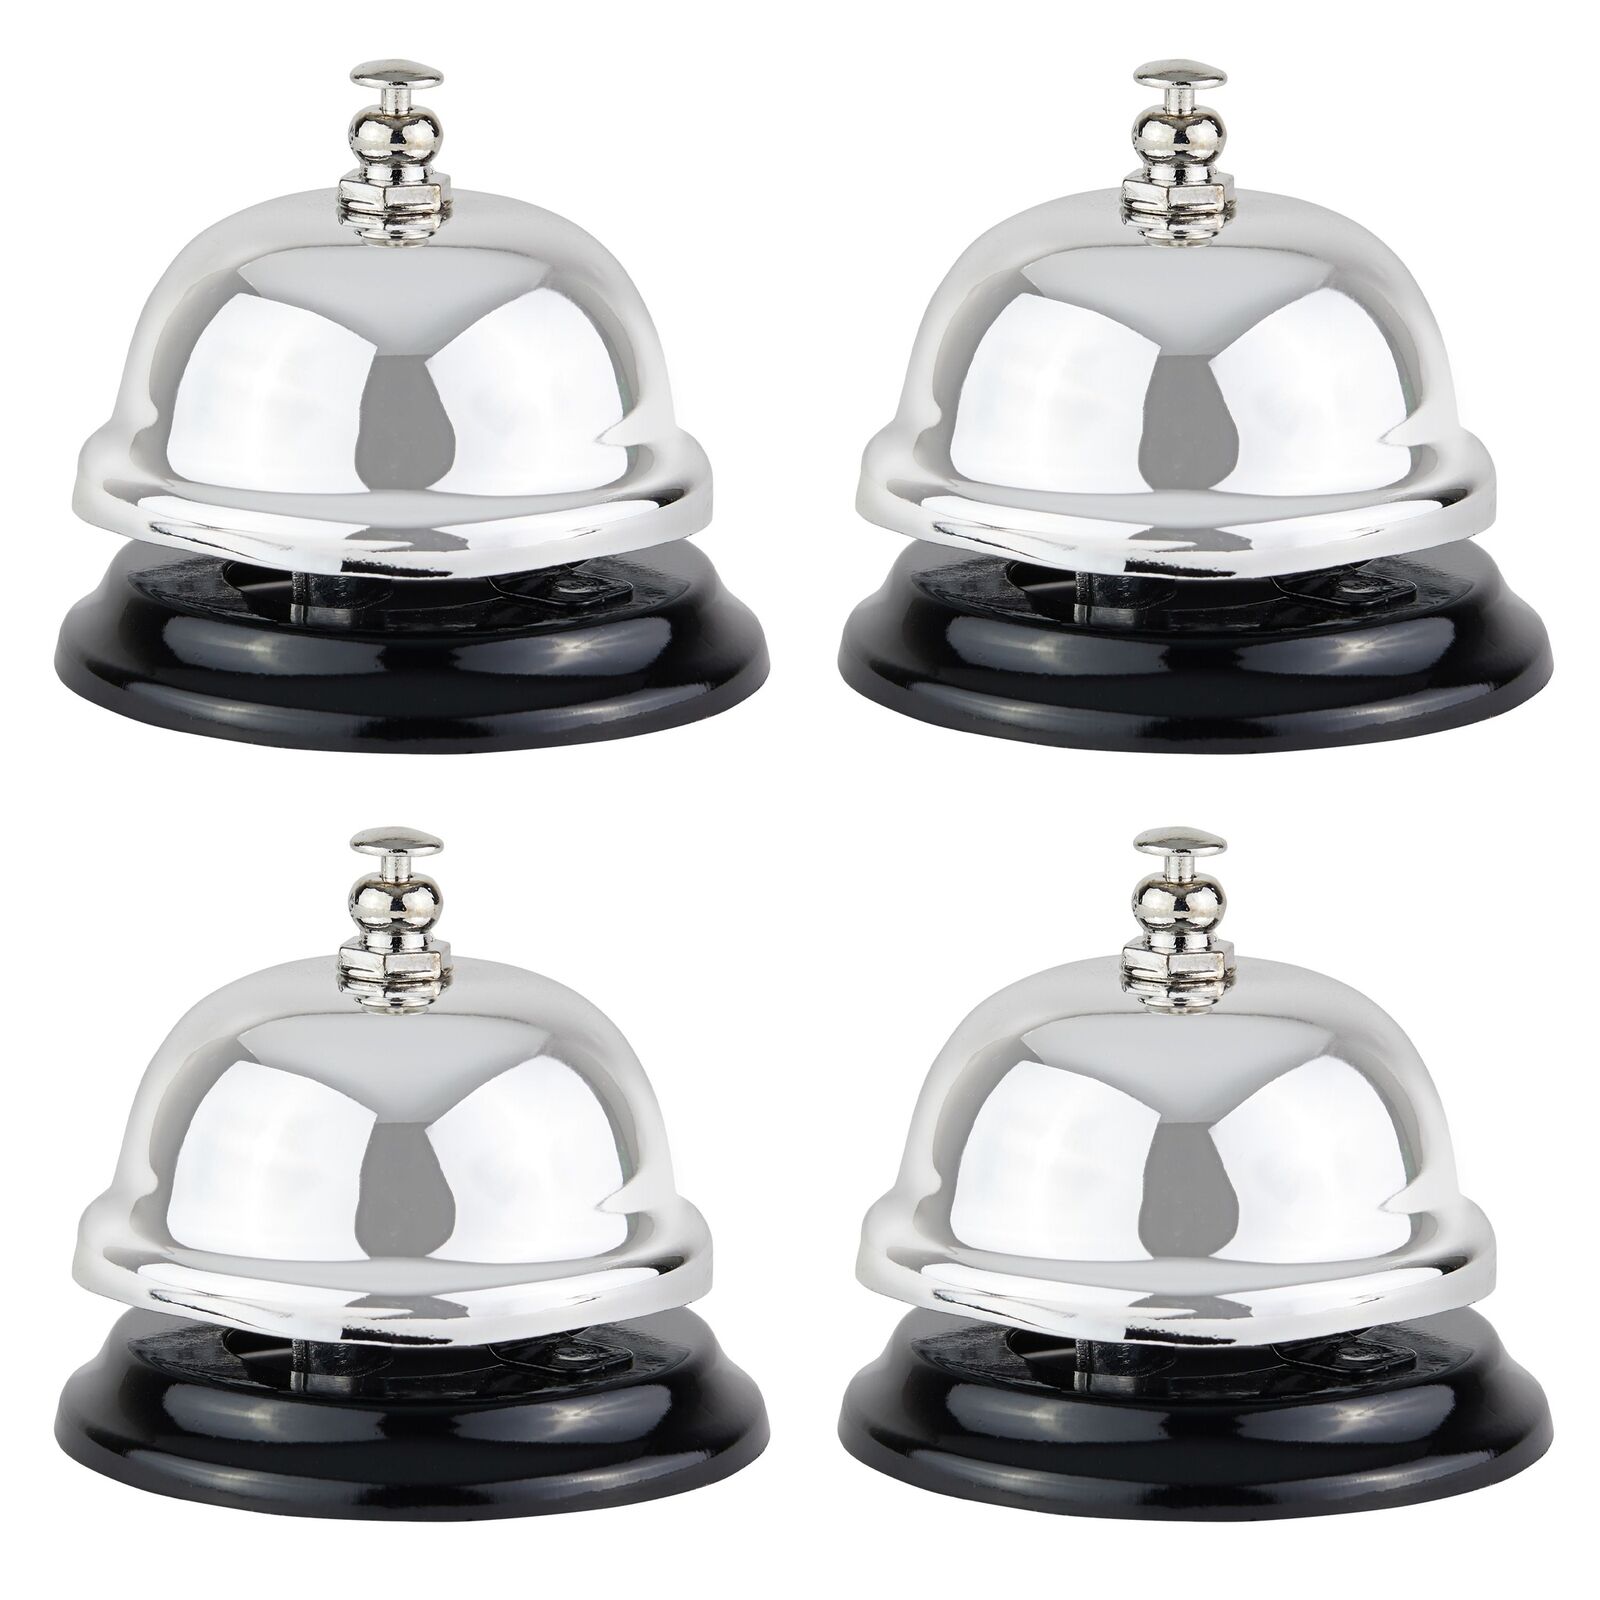 4 Pack Mini Call Bell for Front Desk, Hotel Service, Kitchen (Silver, 2.5x2 in)